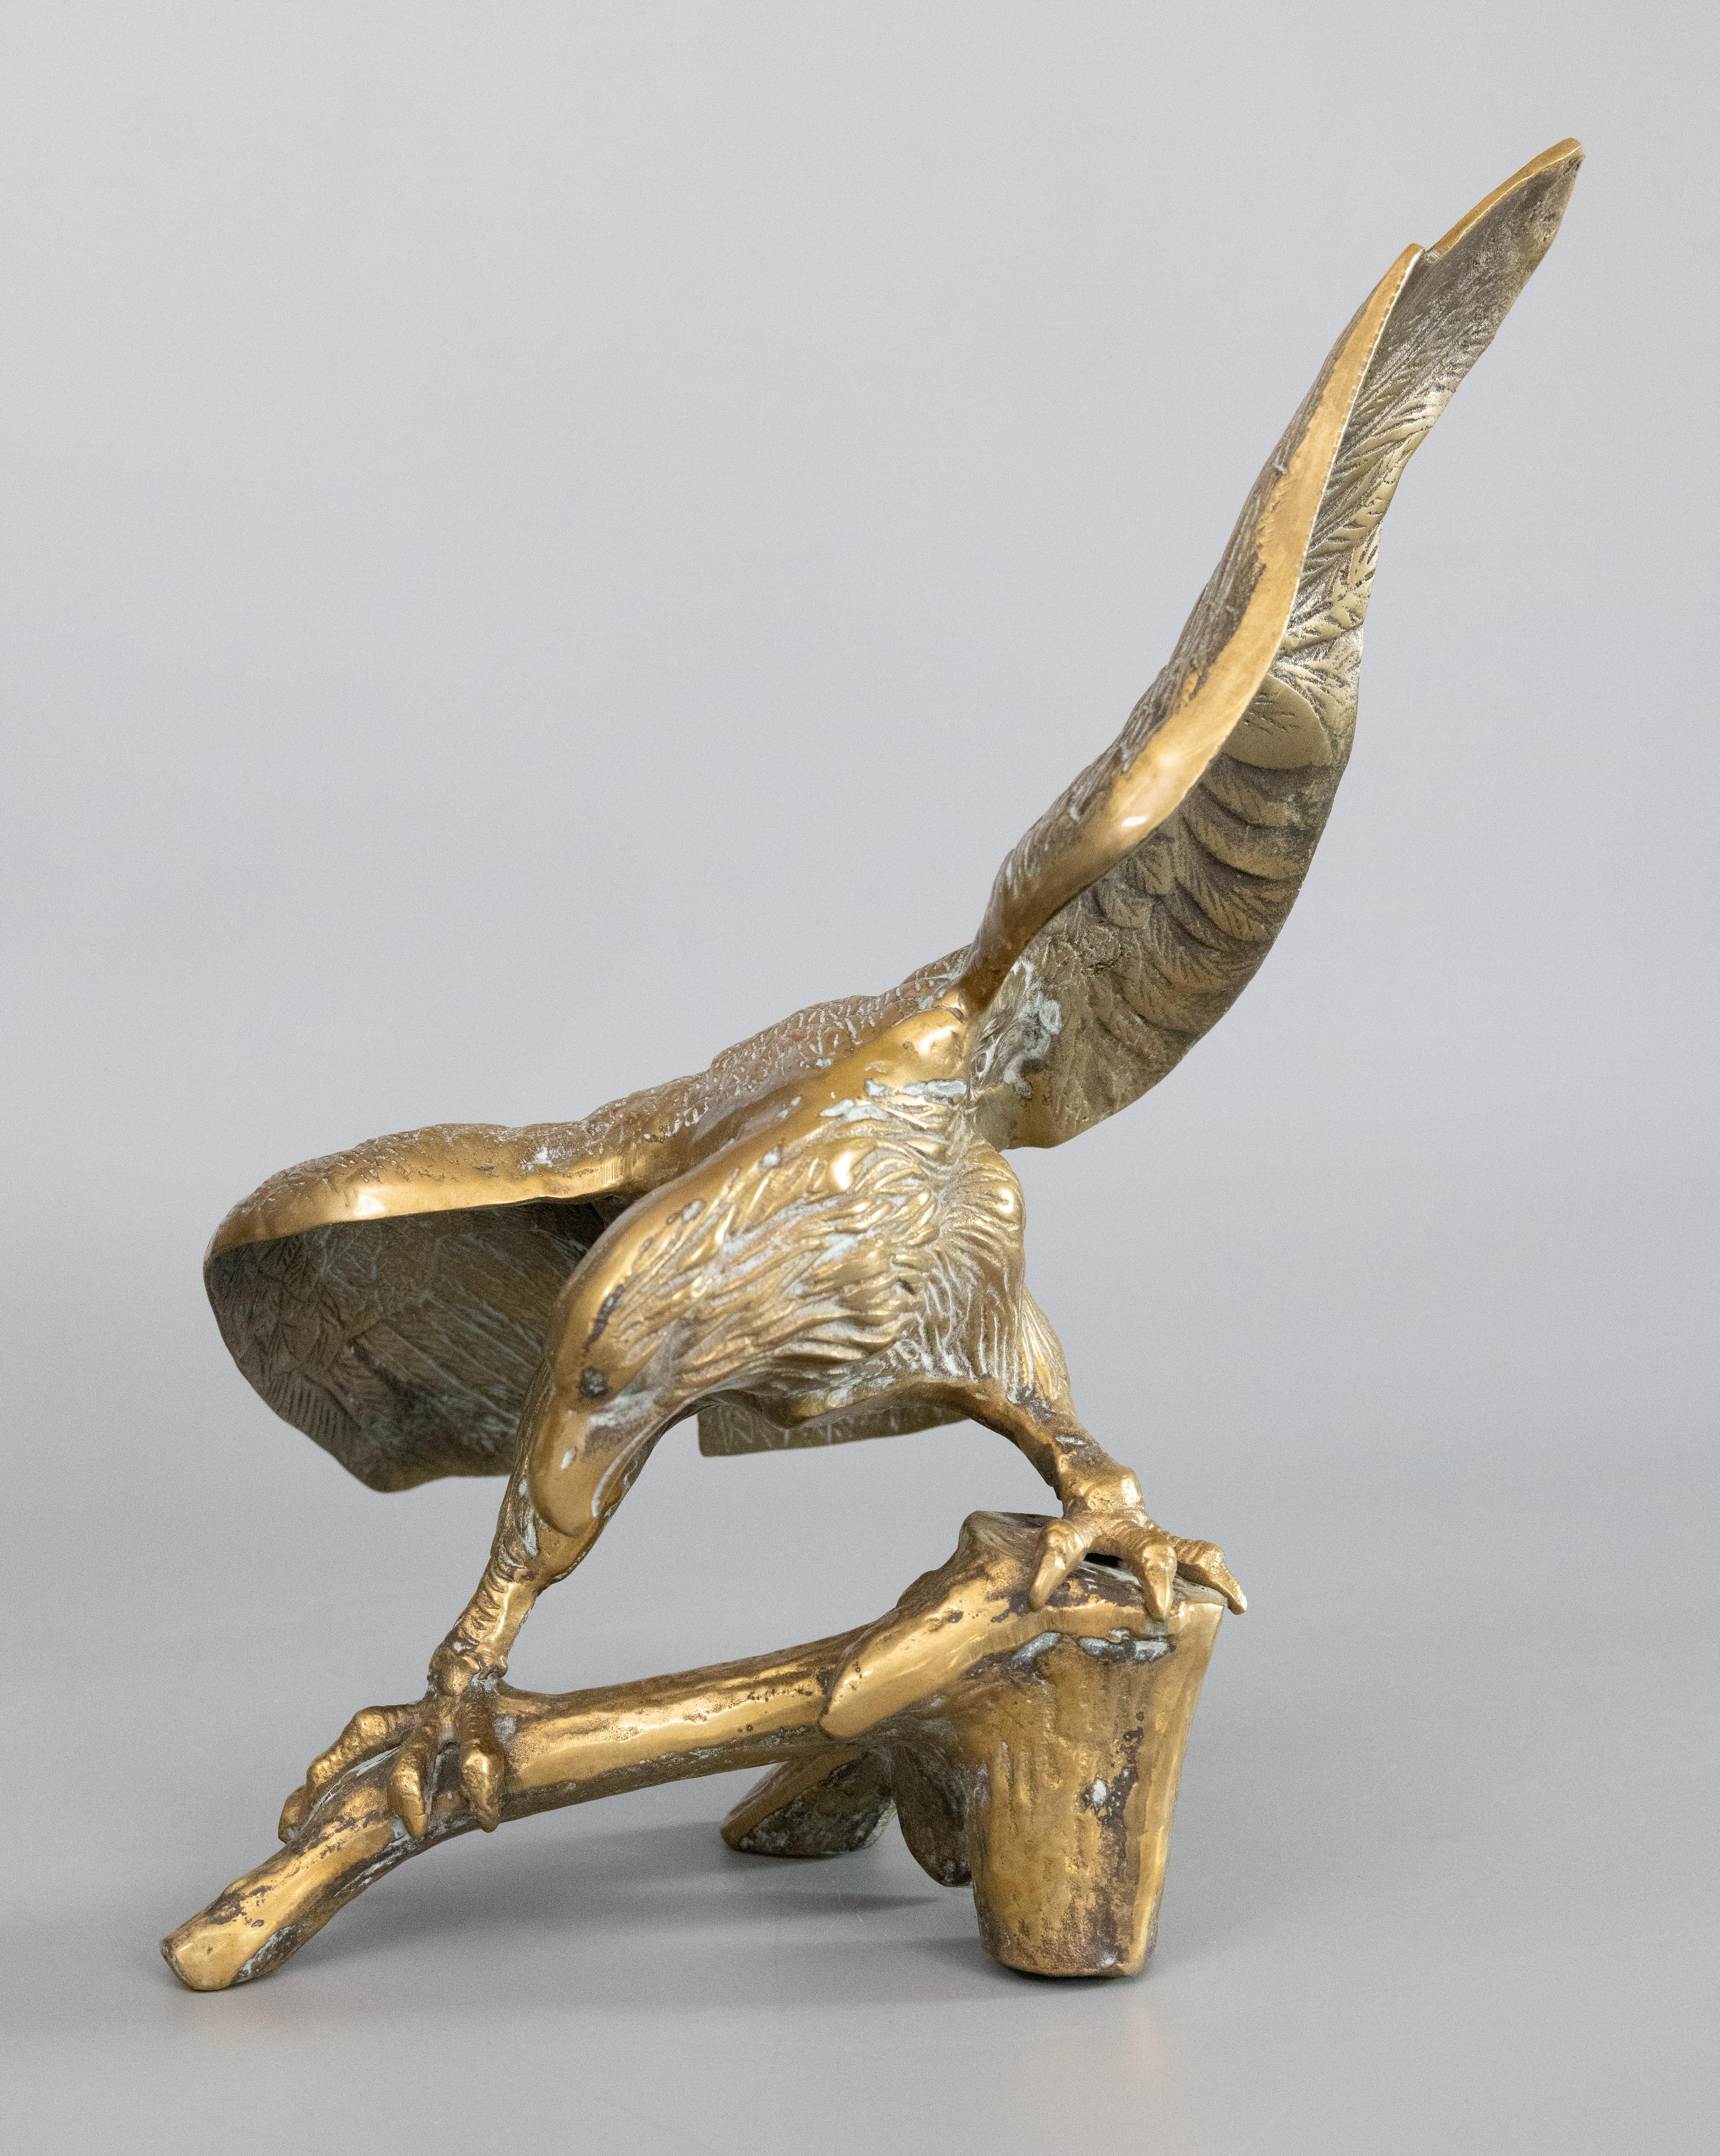 A superb mid-century Federal style American brass bald eagle sculpture perched on a tree branch with outstretched wings. This fine quality sculpture is large and heavy with wonderful details and a lovely aged patina. It would be a handsome addition